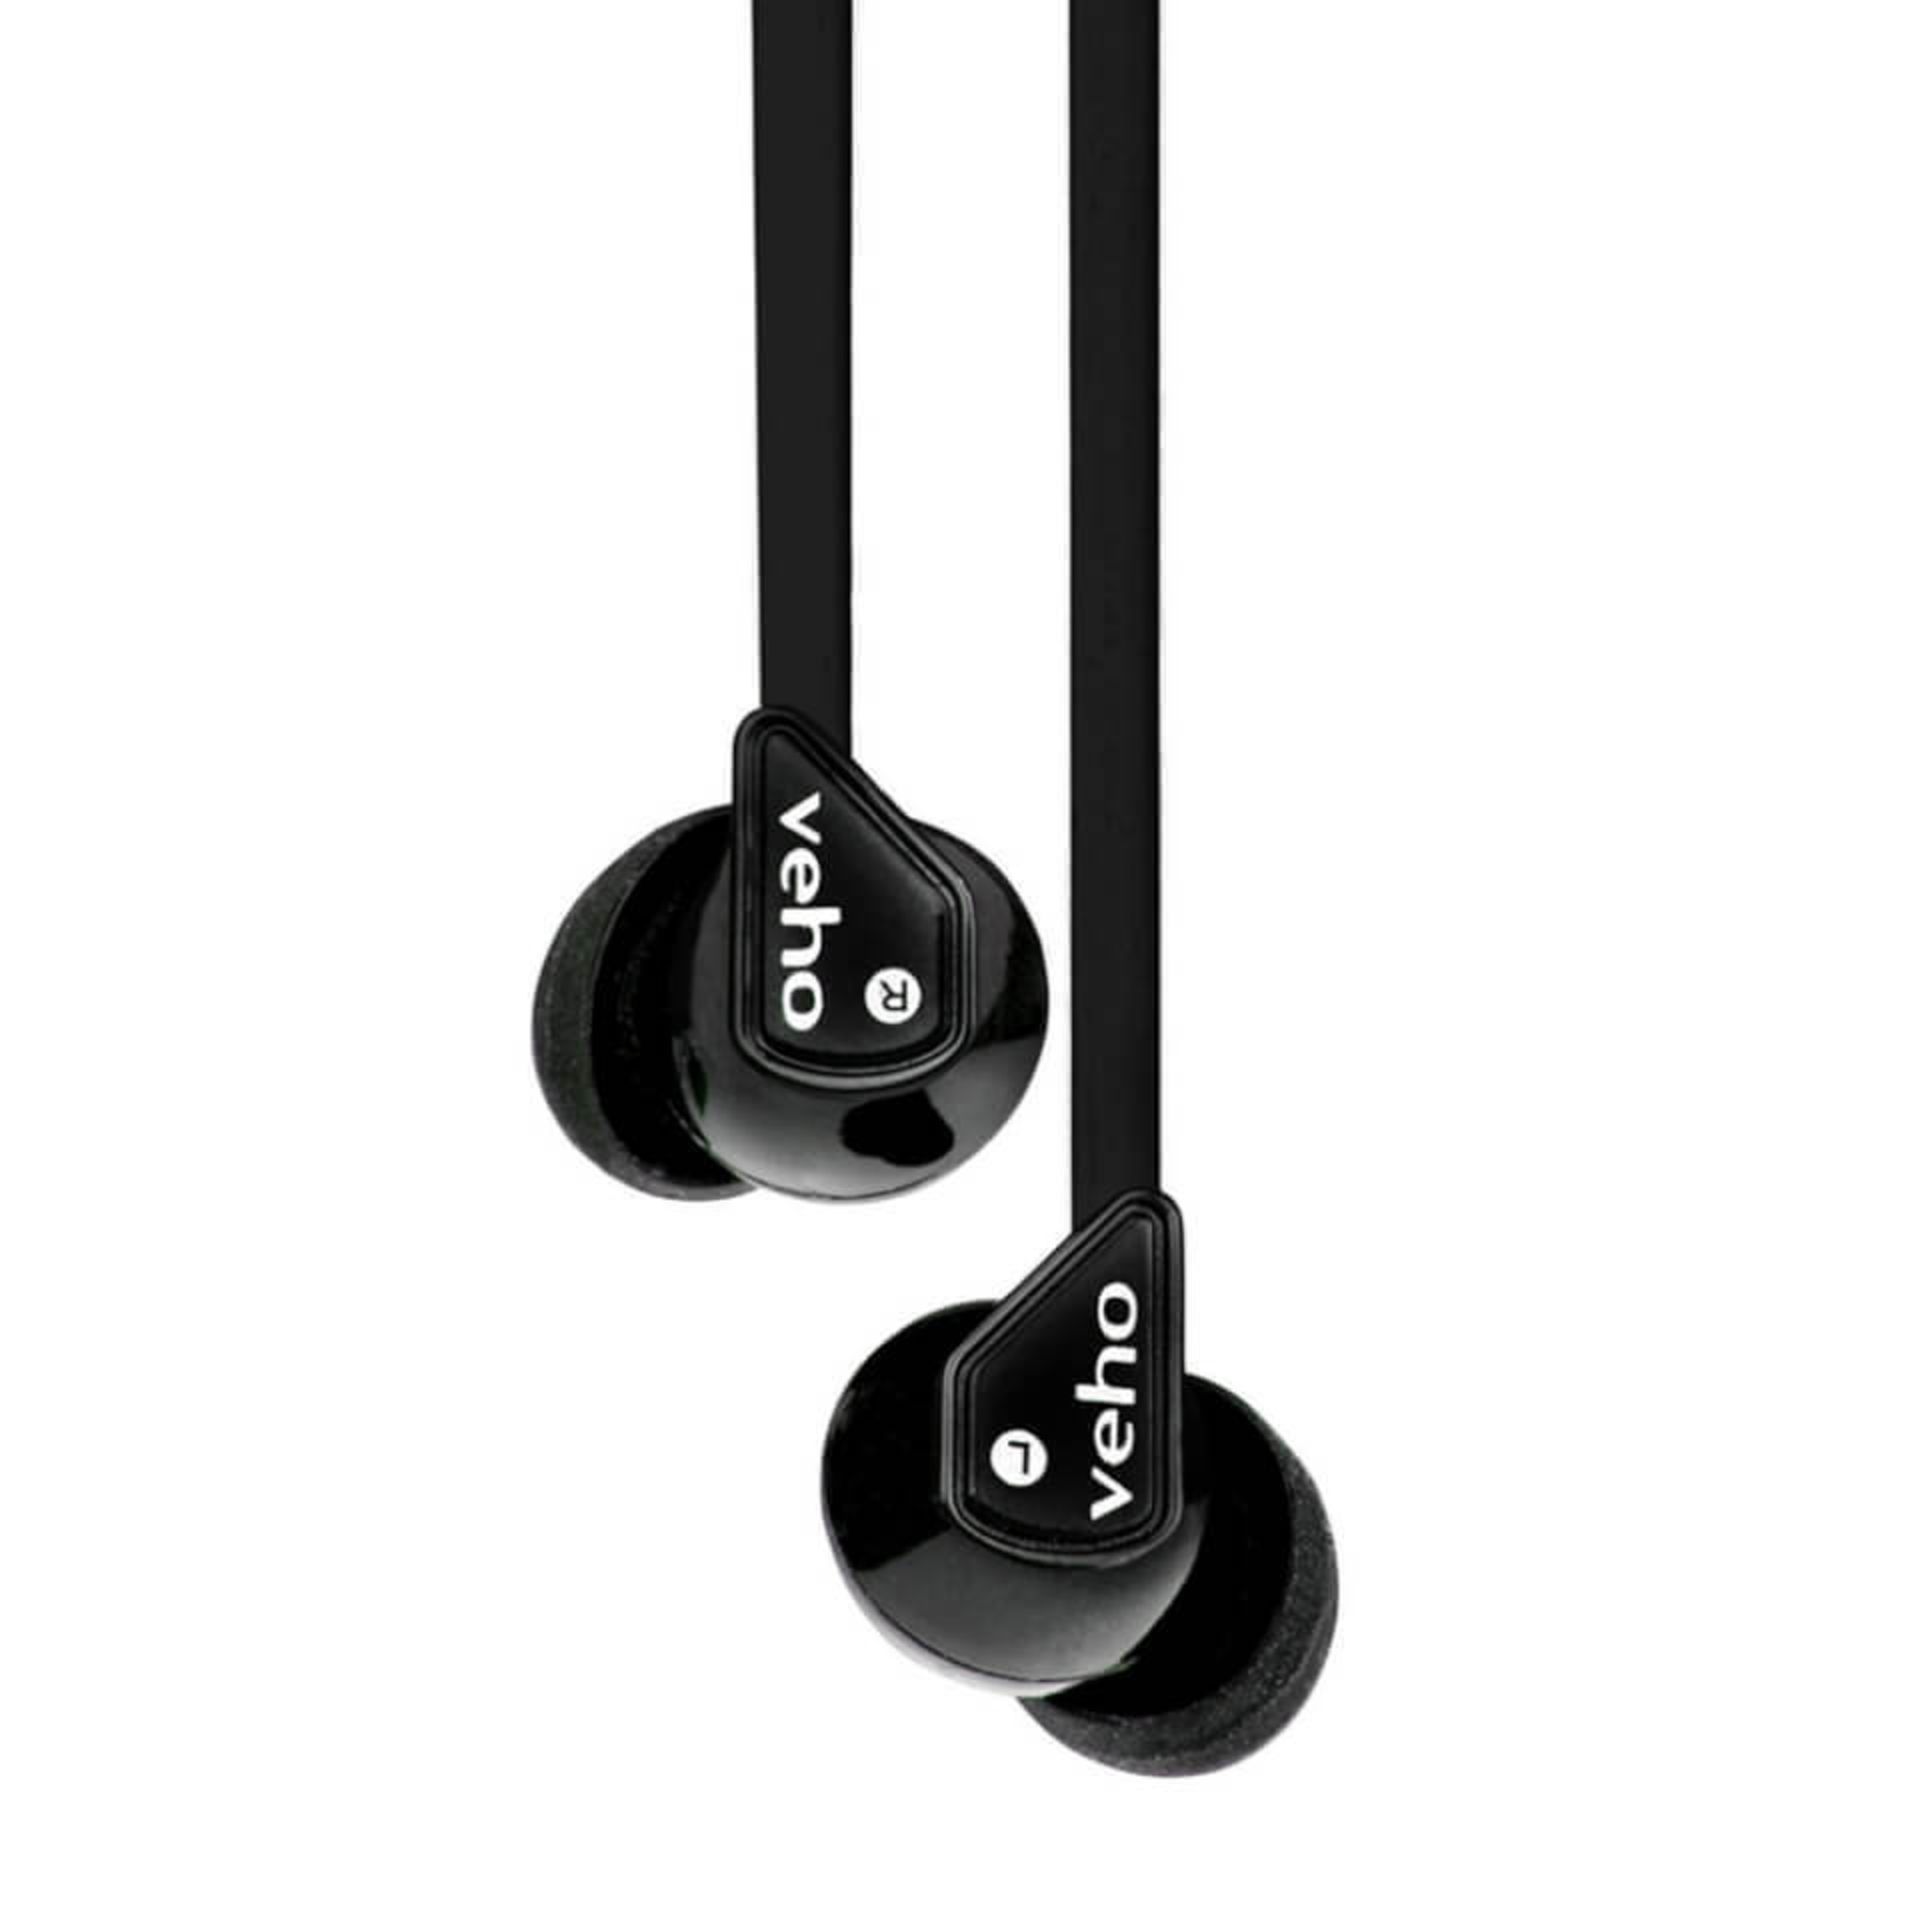 V *TRADE QTY* Brand New Veho Z-1 Noise Isolating Stereo Earbuds - Black - Online Price £19.95 X 12